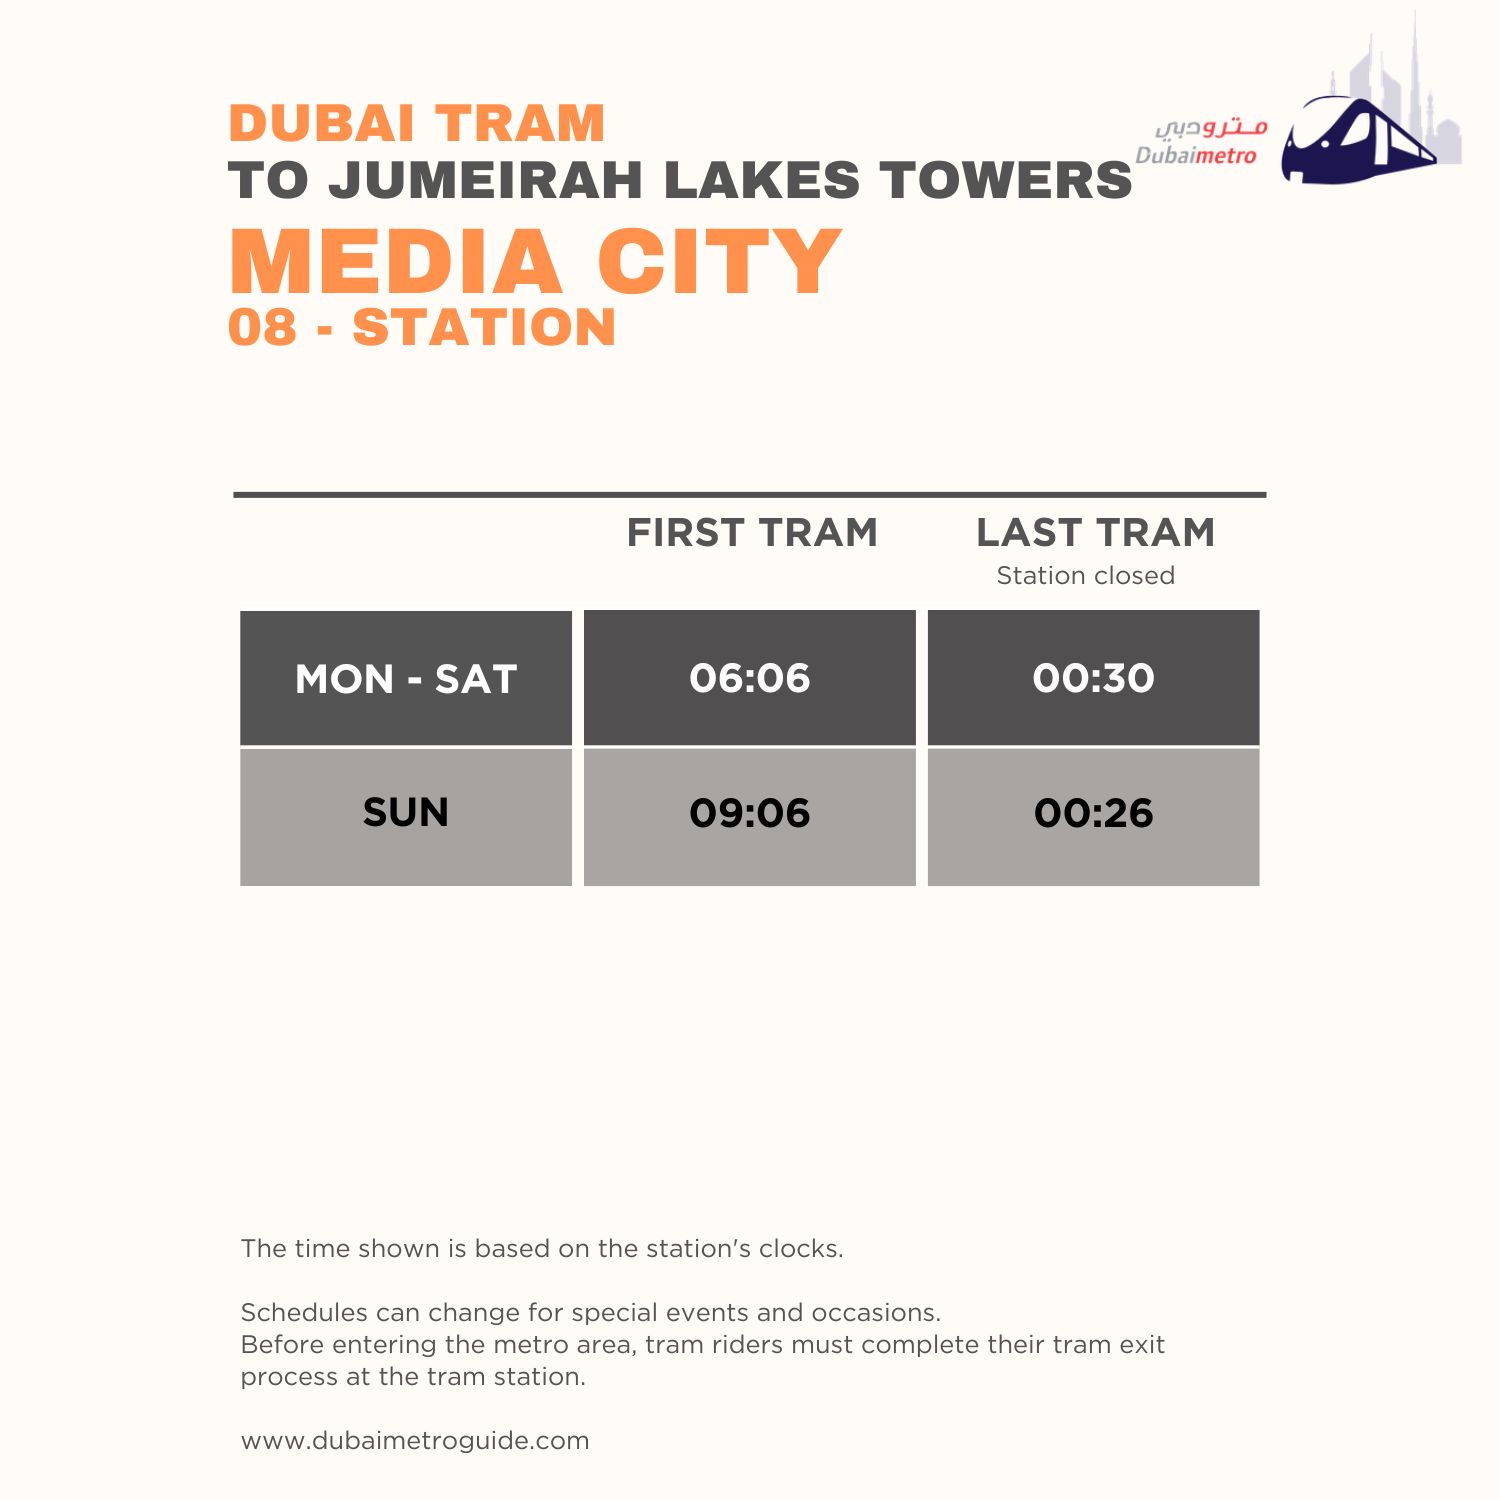 Media City Tram Station Timings to Jumeirah Lakes Towers – First Tram and Last Tram Timings